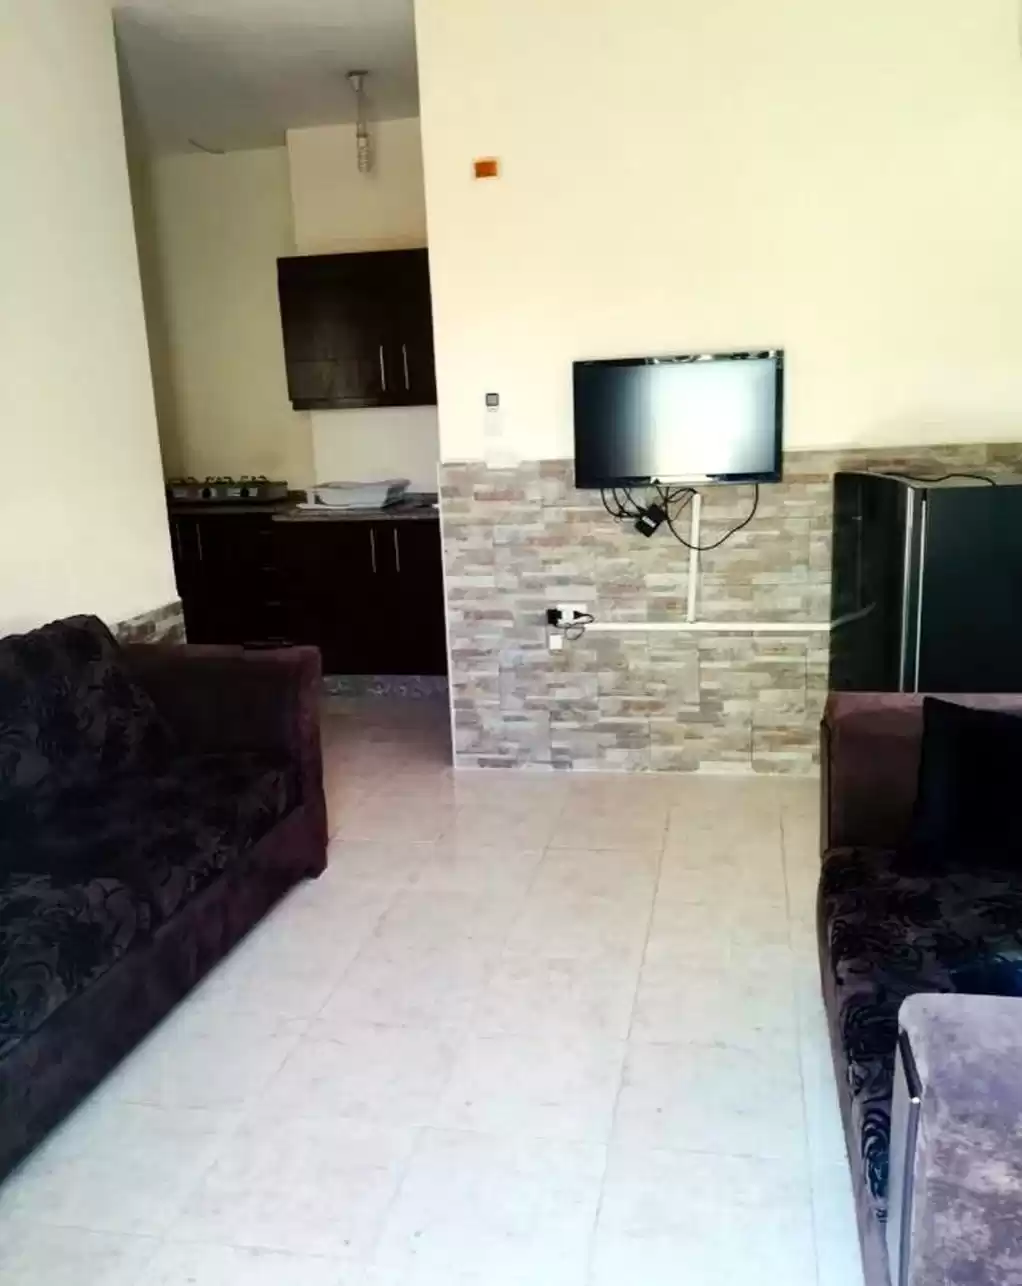 Residential Ready Property Studio F/F Apartment  for rent in Amman #26339 - 1  image 